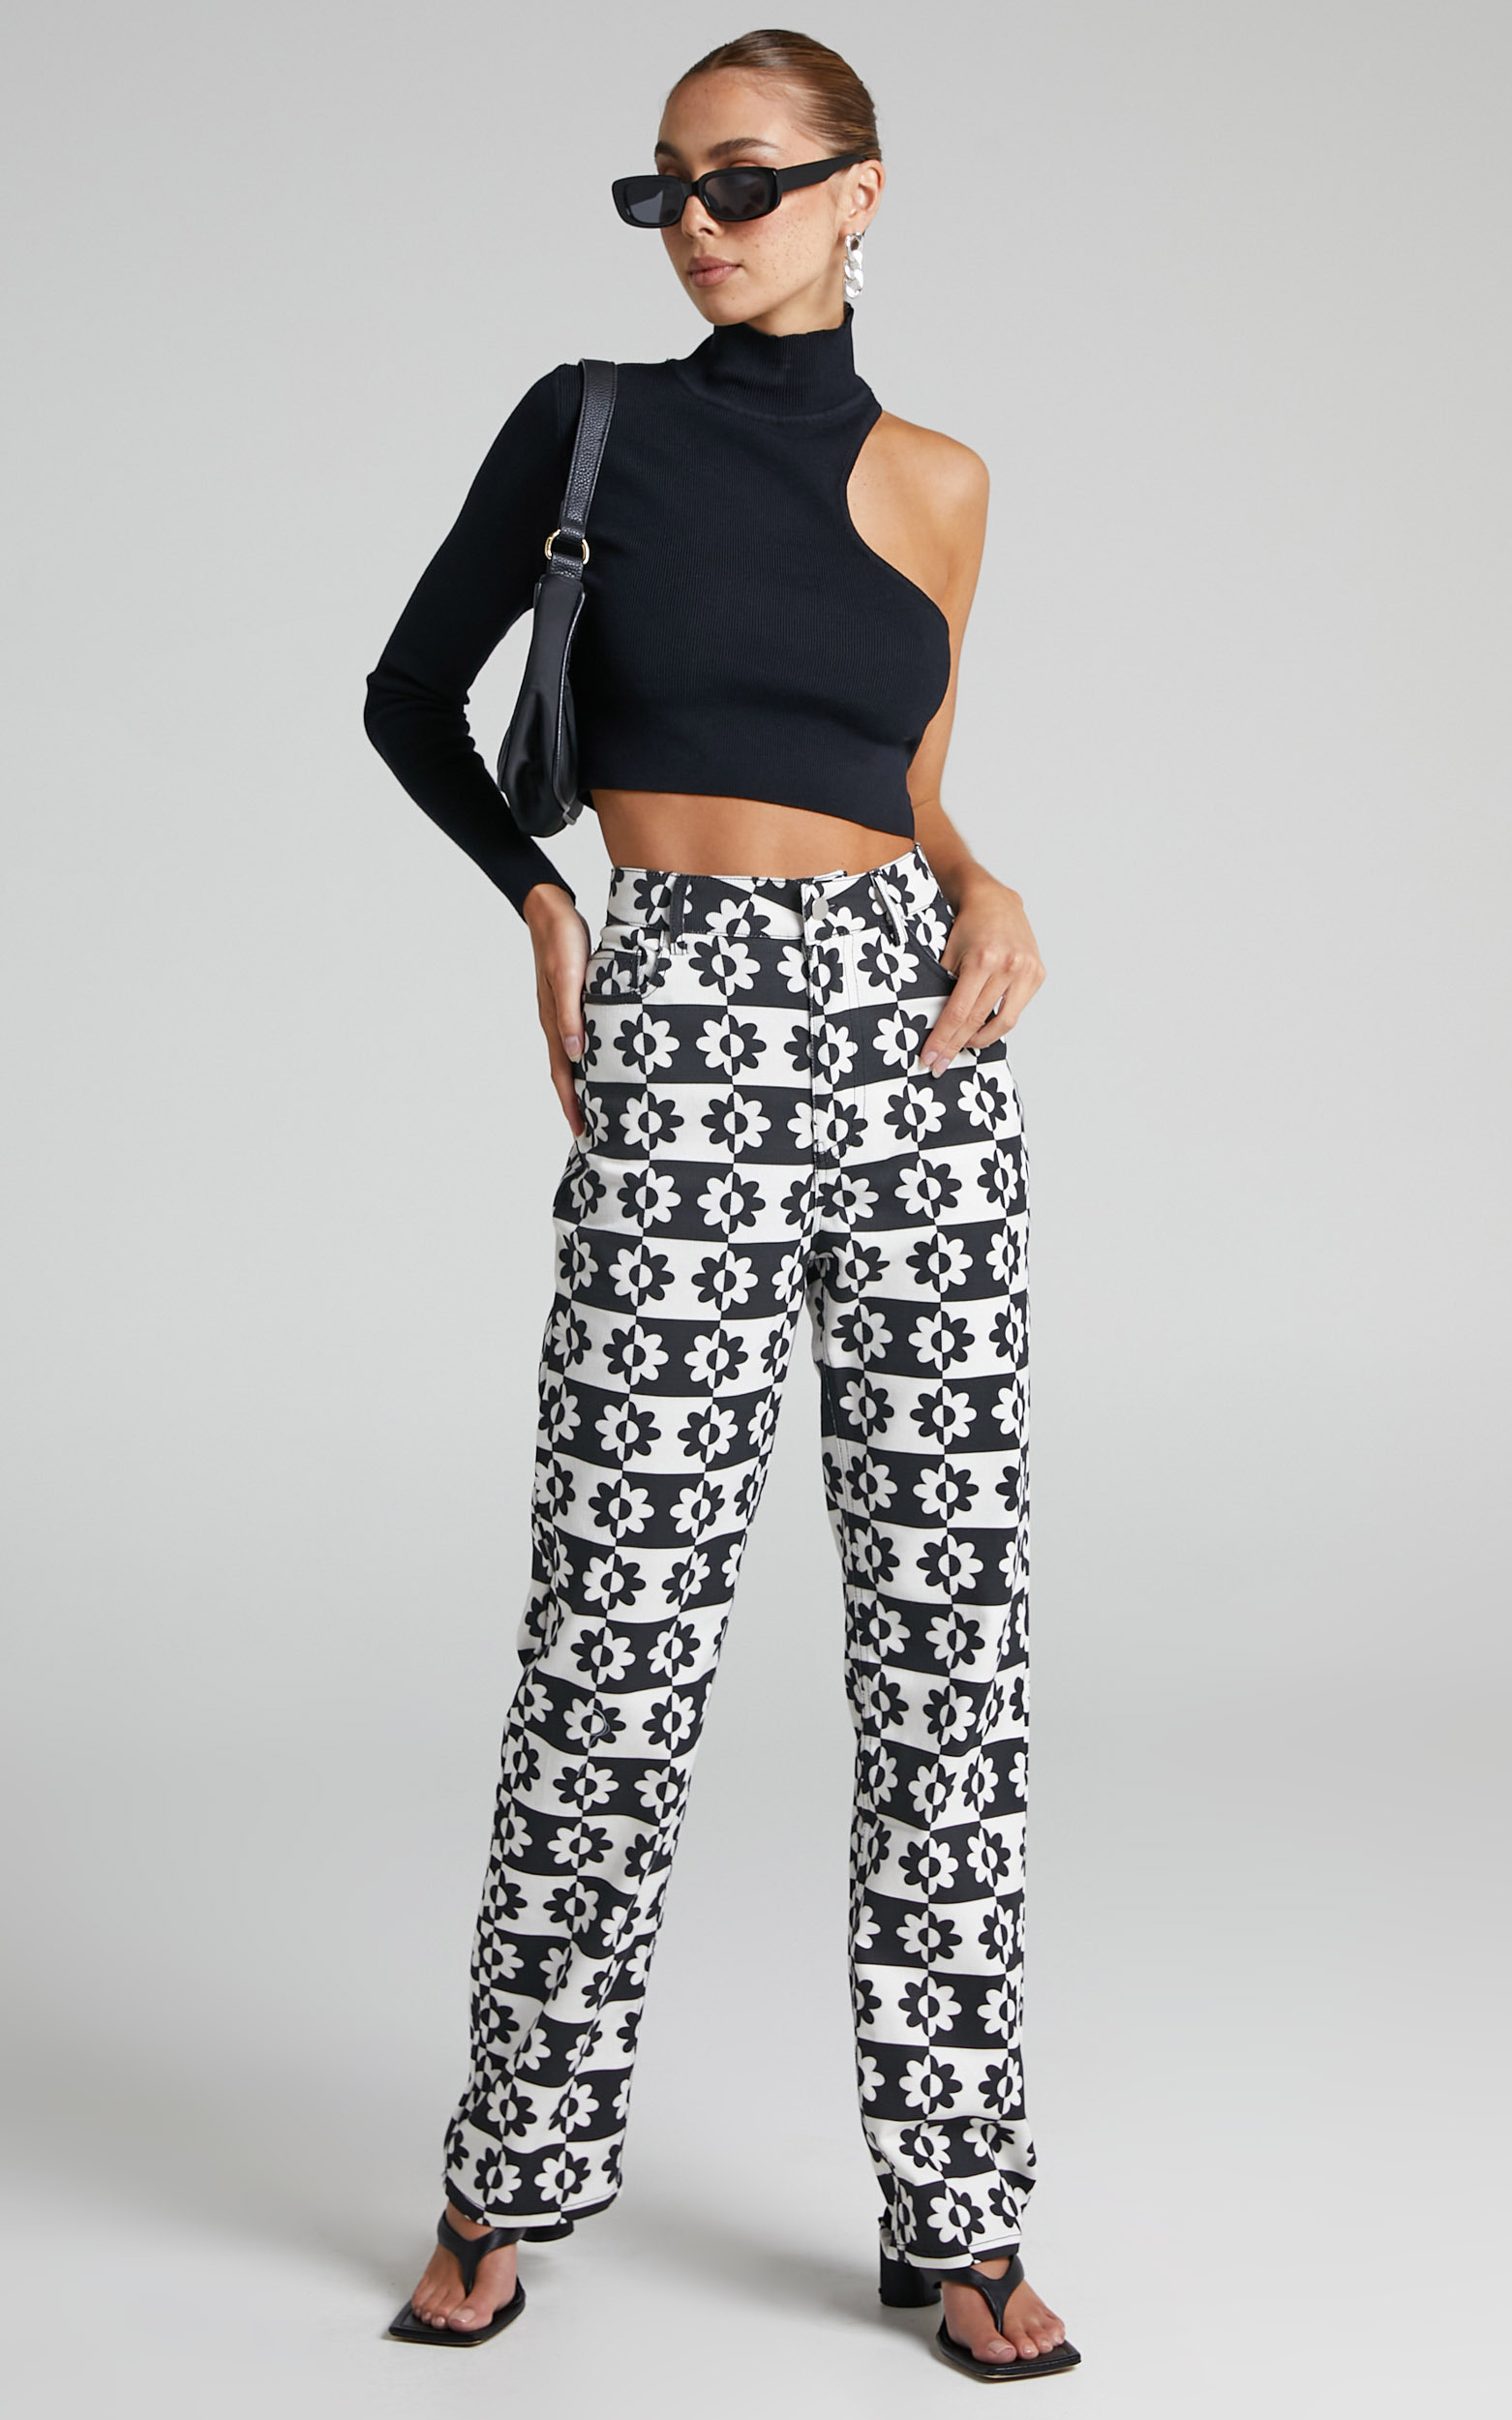 Illusions Printed Pants in Black/White - S, BLK1, hi-res image number null